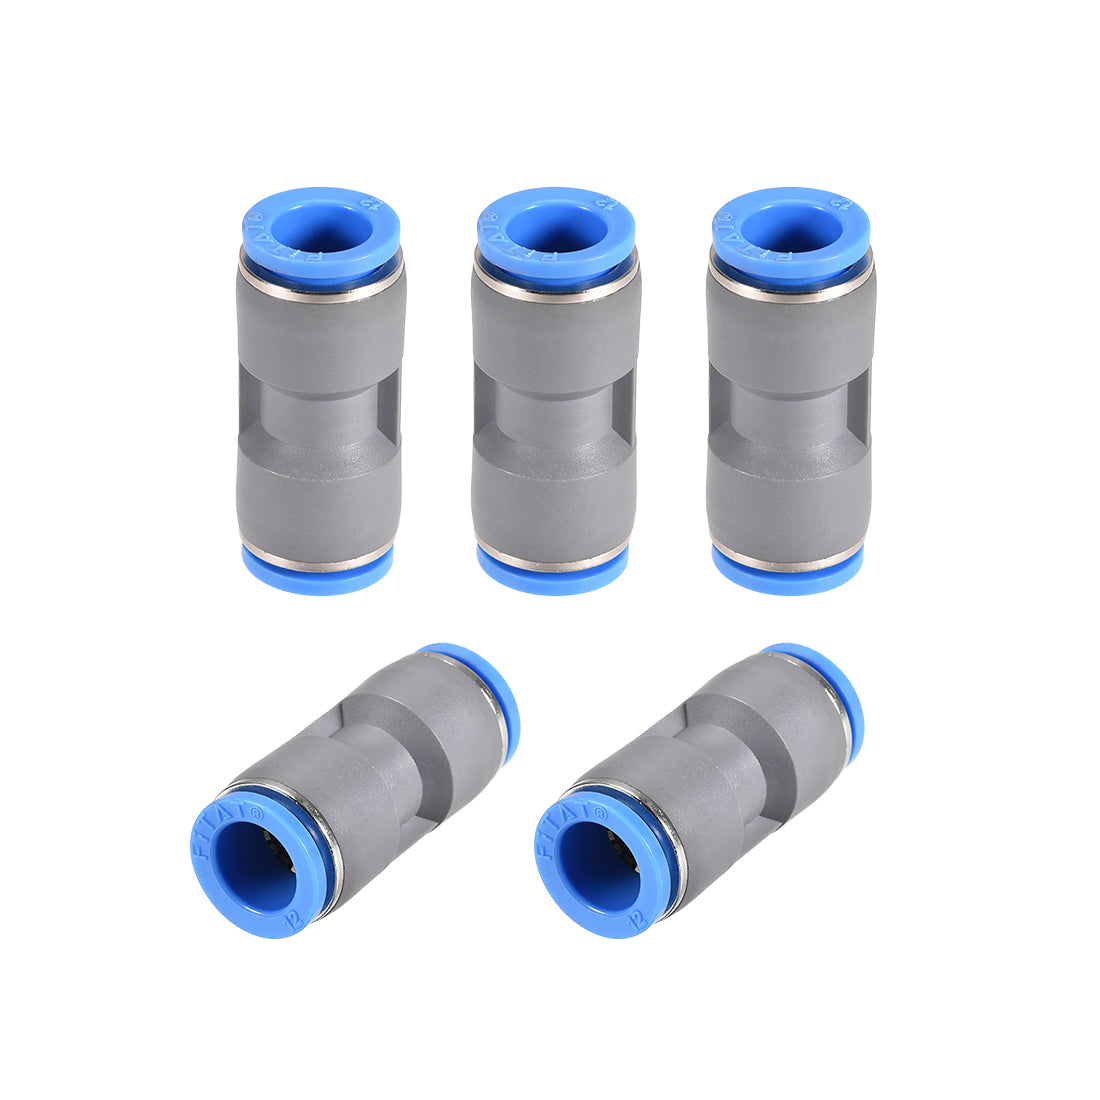 uxcell Uxcell Straight Push Connectors 12mm Quick Release Pneumatic Connector Plastic Union Pipe Tube Fitting Grey 5Pcs